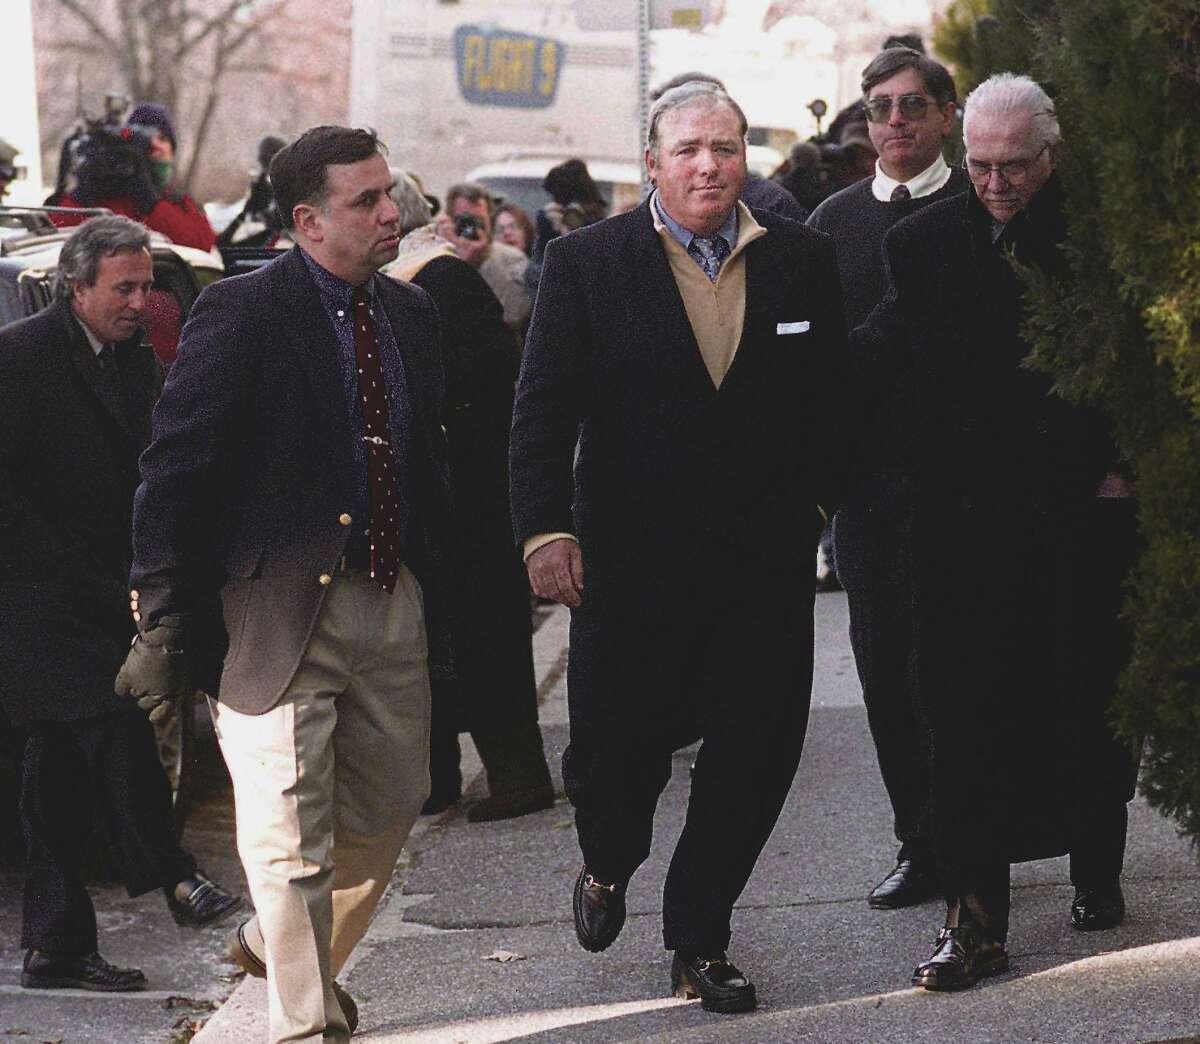 Michael Skakel, center, is led into Greenwich police headquarters by Frank Garr, right, where he was arrested and processed for the murder of Martha Moxley which occured on Oct 30th, 1975. Garr was the lead Greenwich police investigator on the case. At the far left is Skakel's lawyer, Mickey Sherman.